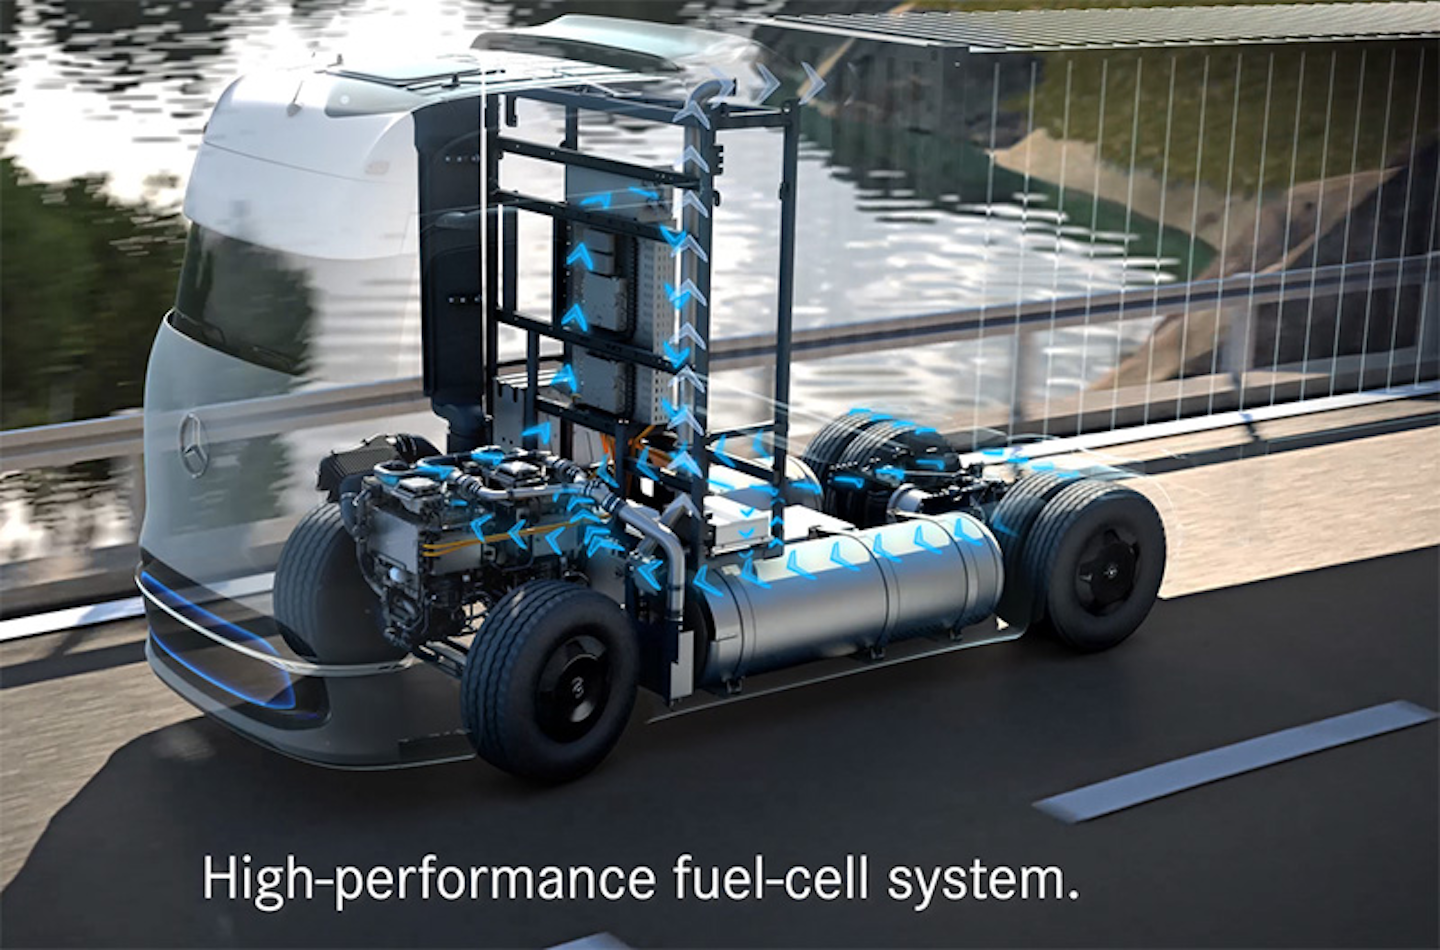 Daimler AG reveals fuel cell truck prototype; customer tests begin in